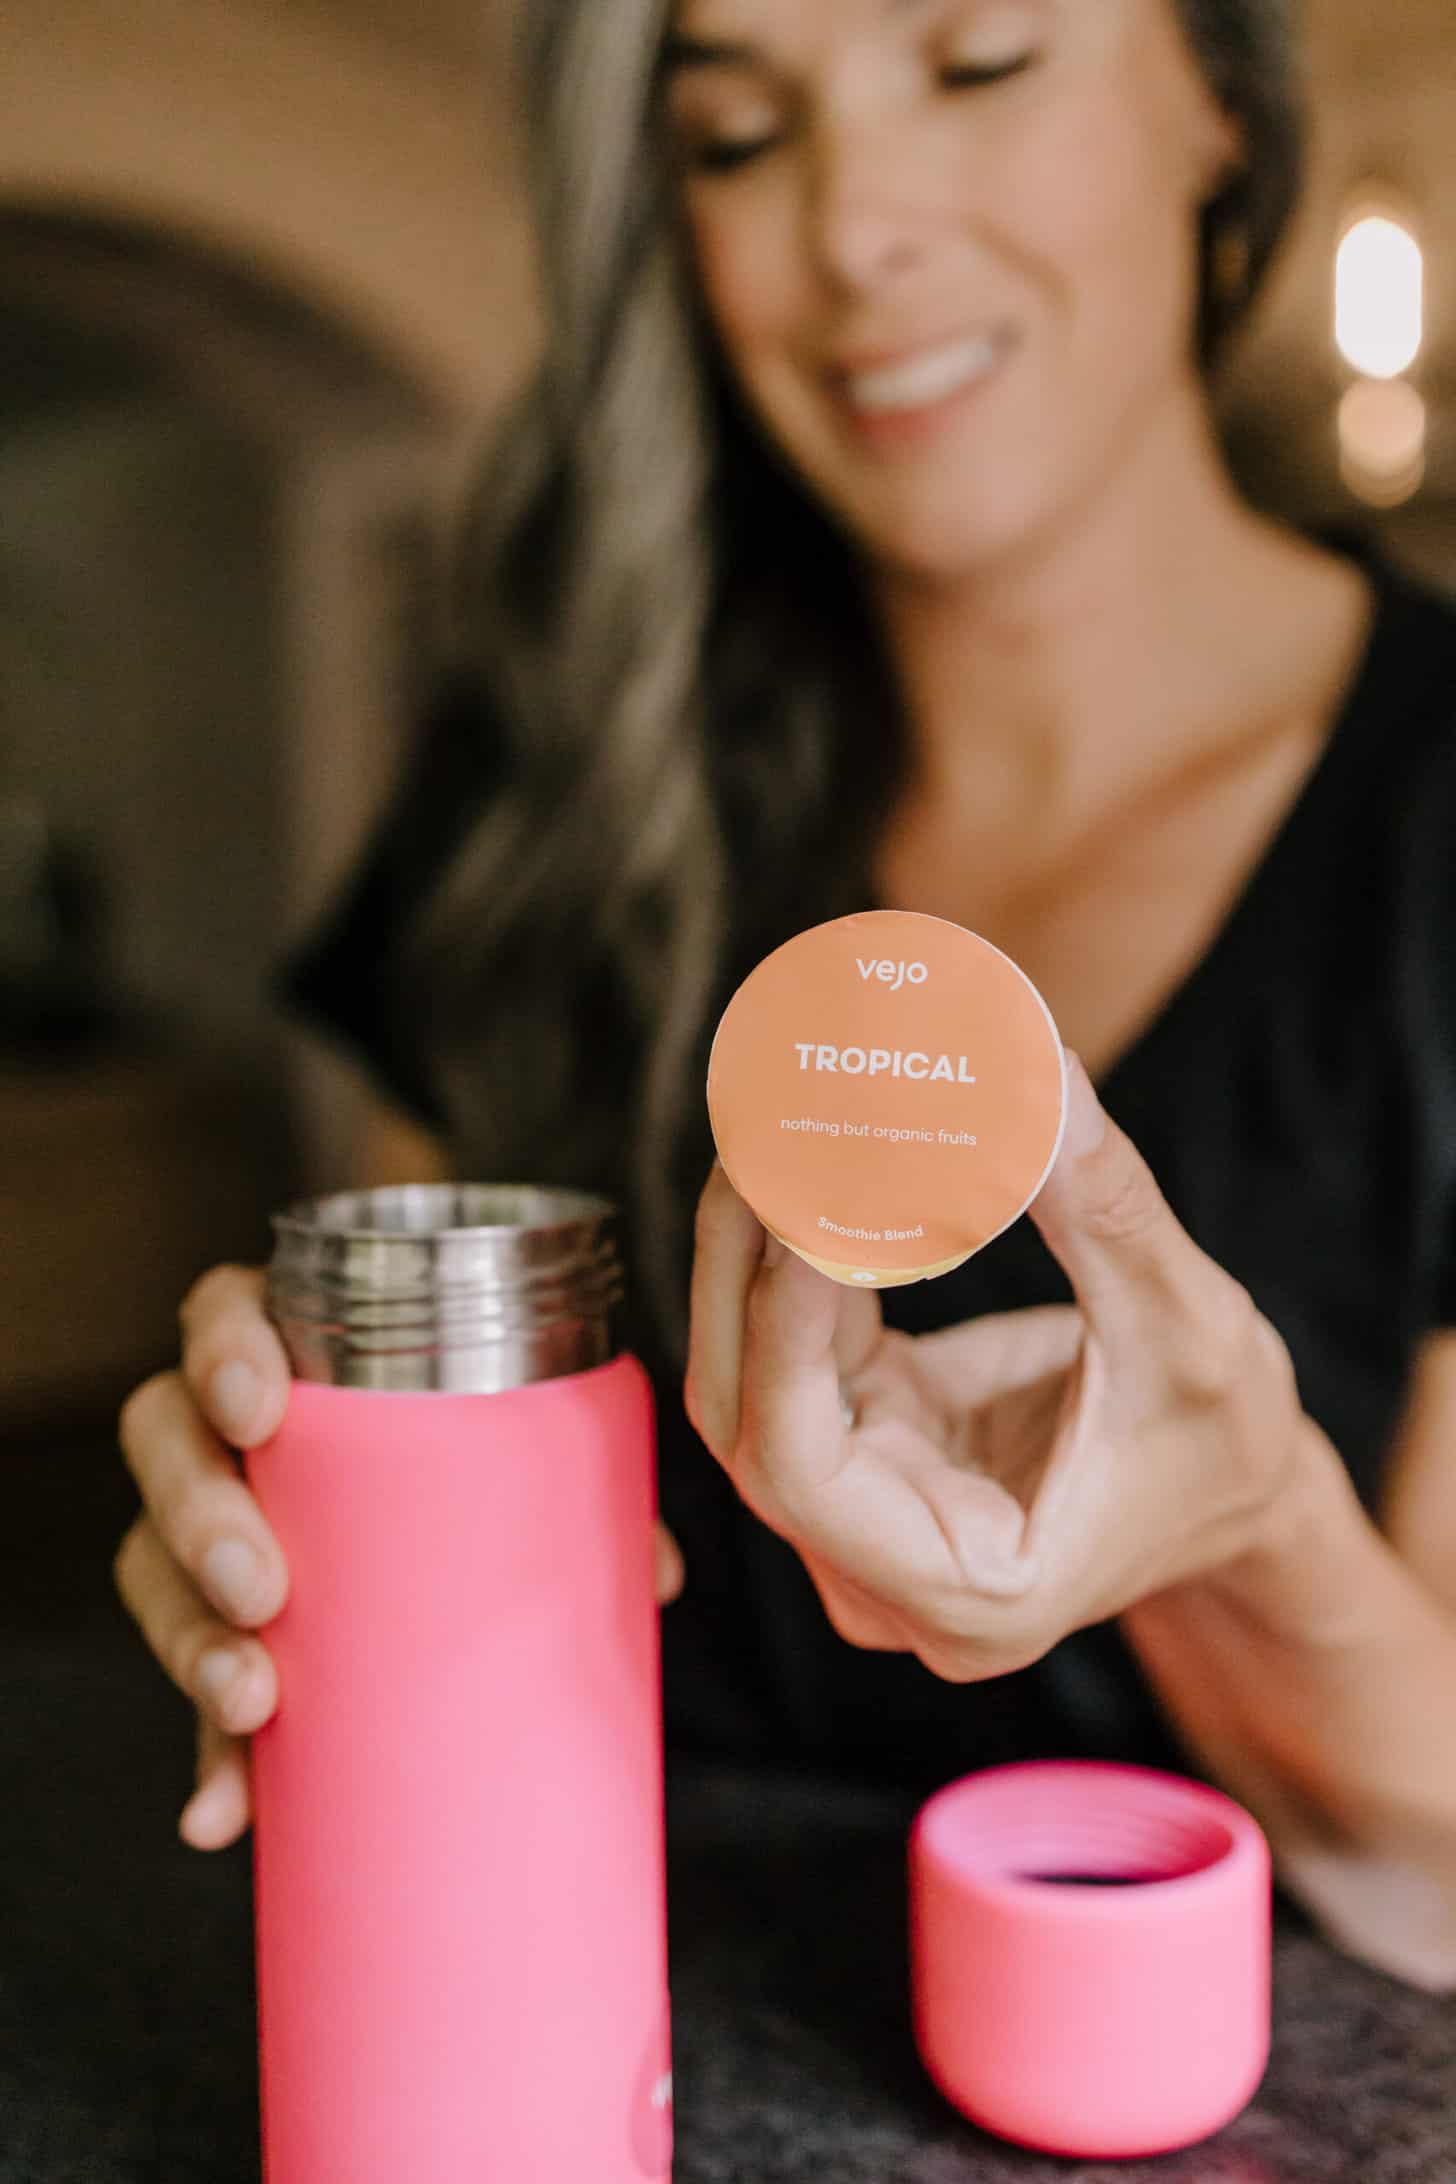 in the foreground a hot pink portable blender and blend capsule are held by a woman in the background